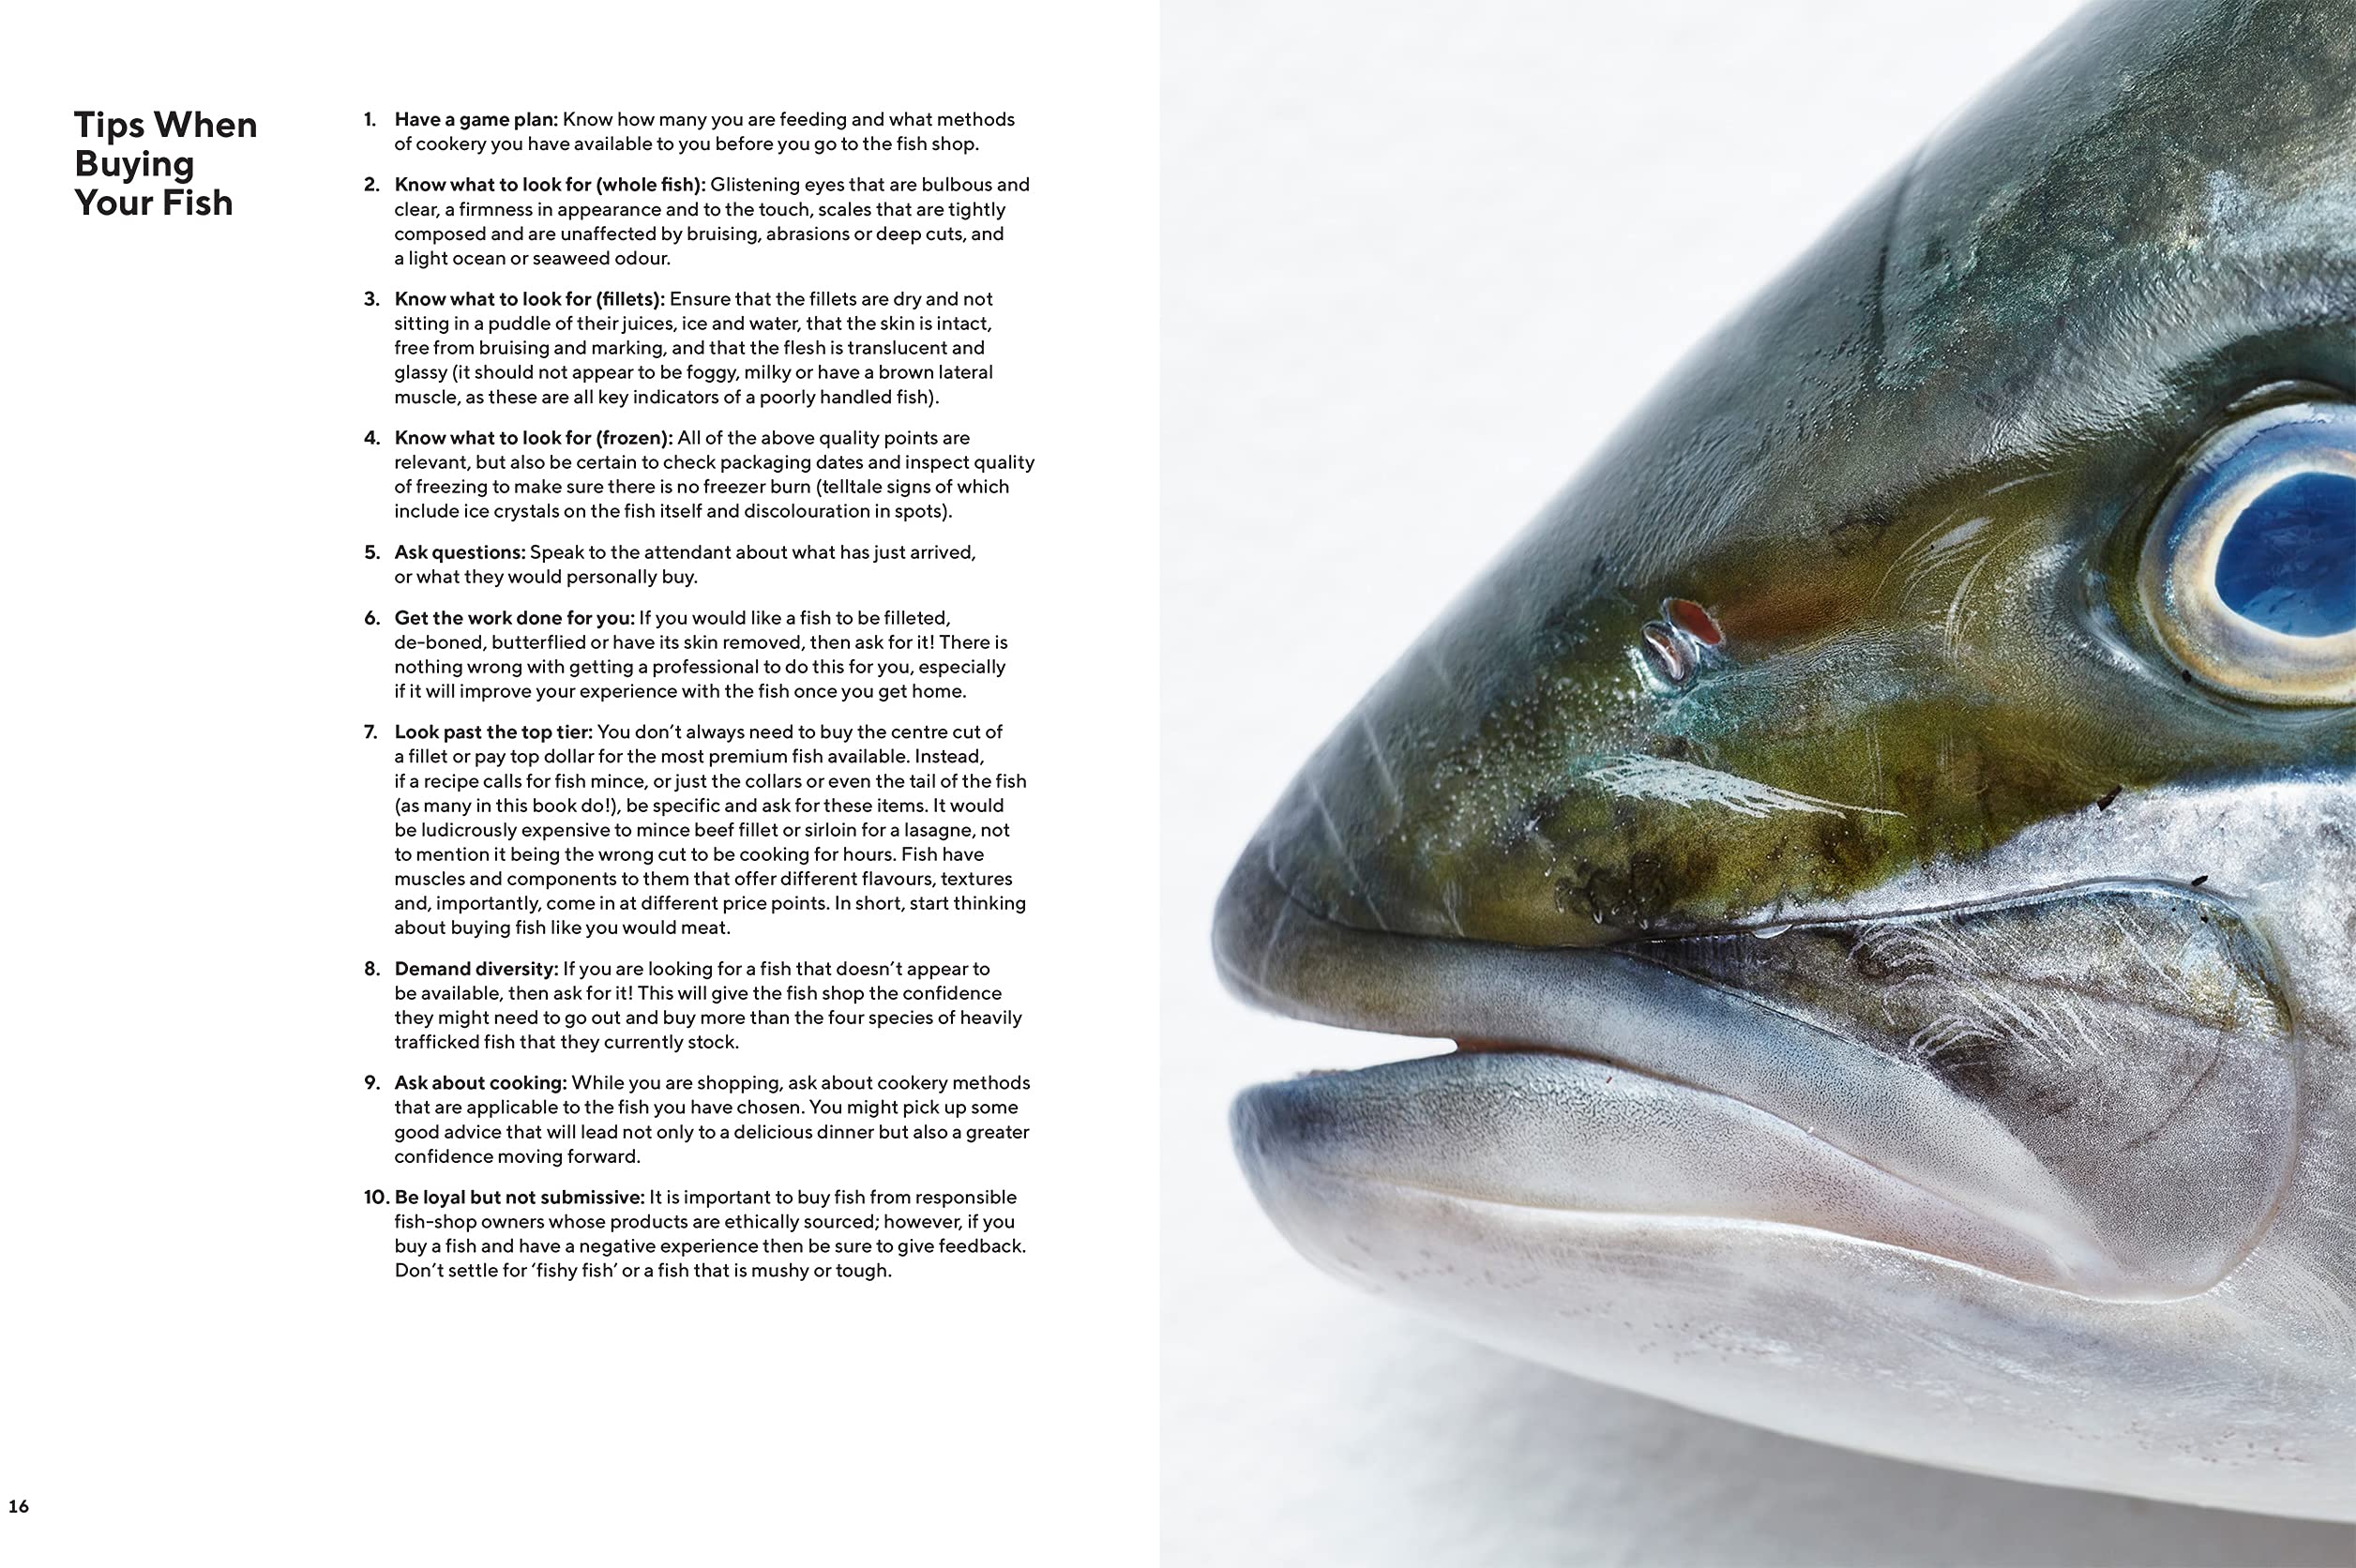 Take One Fish: The New School of Scale-to-Tail Cooking and Eating (Josh Niland)